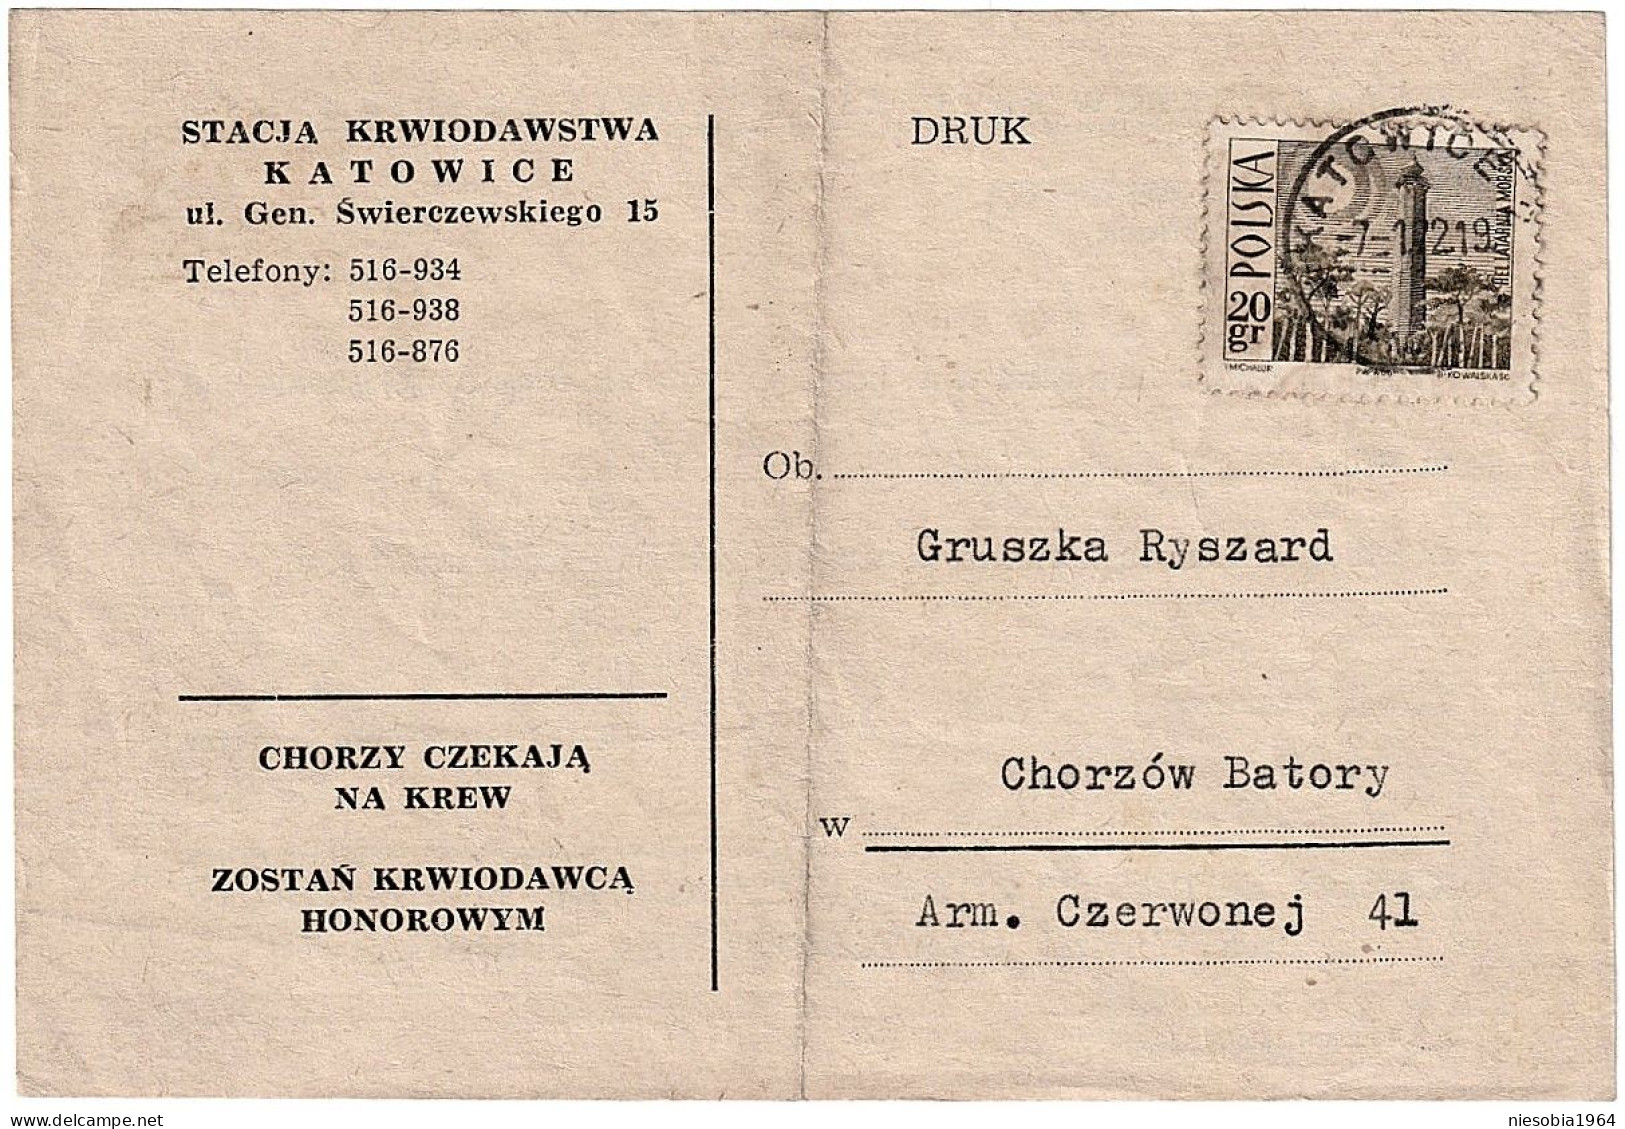 Official Postcard - Honorary Blood Donation Station In Katowice Call For Mandatory Blood Donation Stamp And Seal 7/01/72 - Ganzsachen